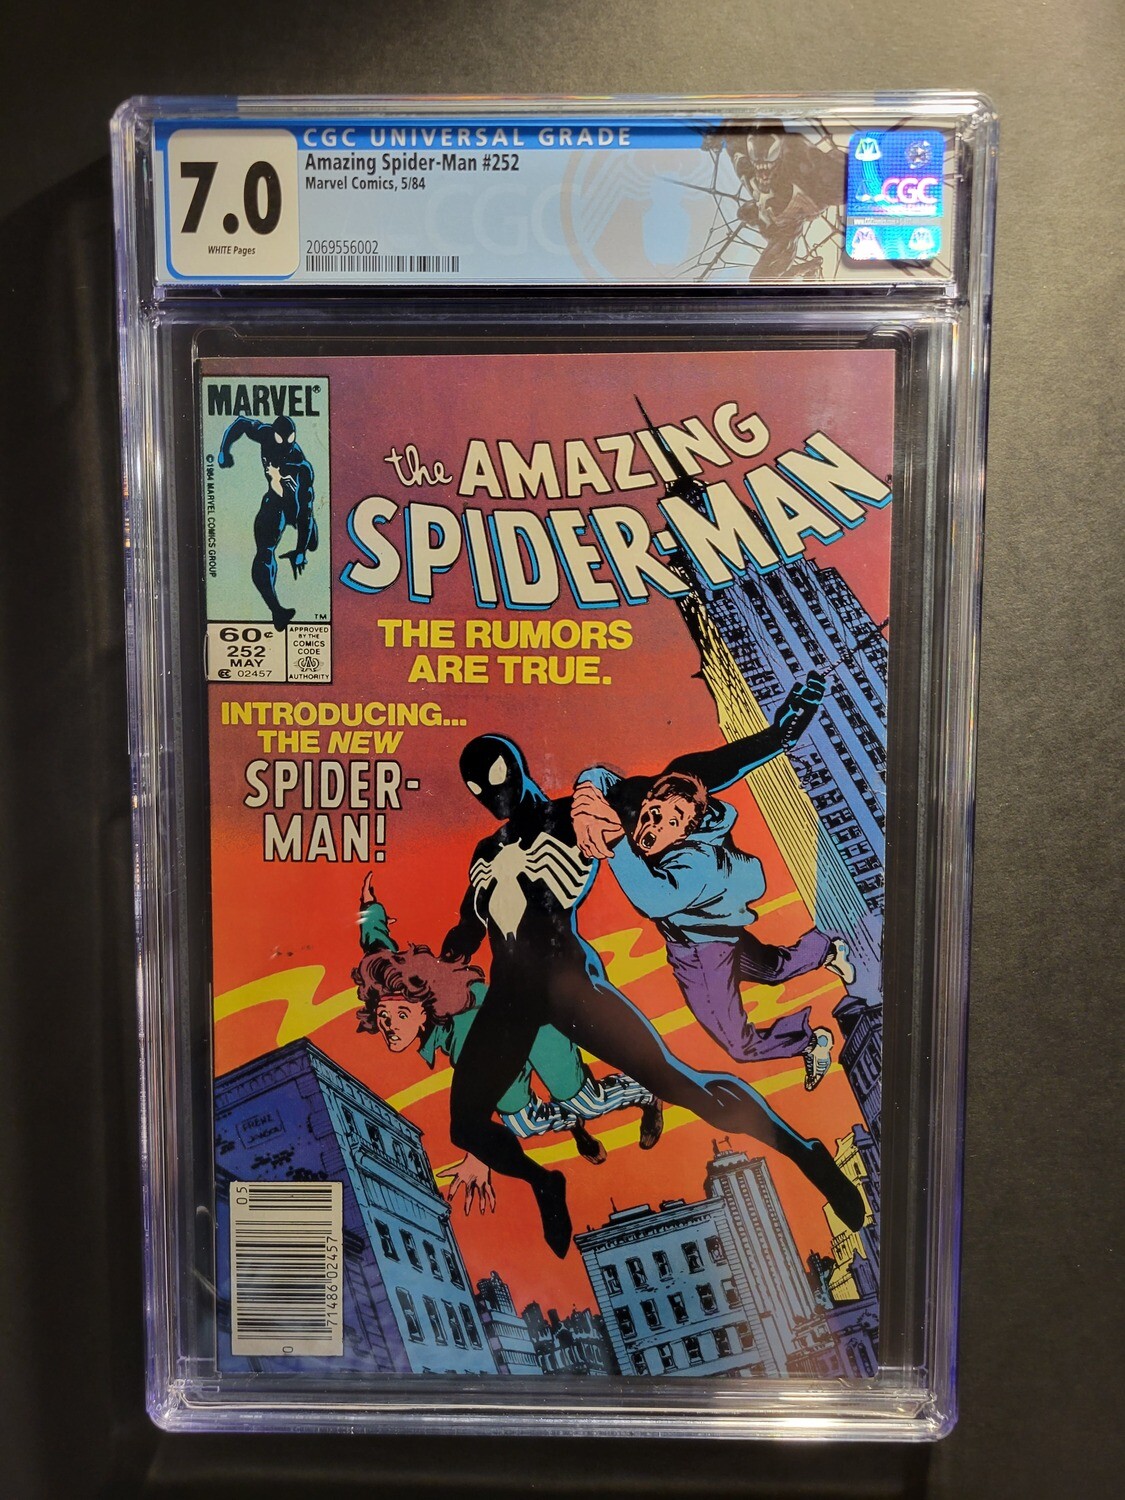 Amazing Spider-Man #252 CGC 7.0 1st appearance of Spider-Man's new black costume